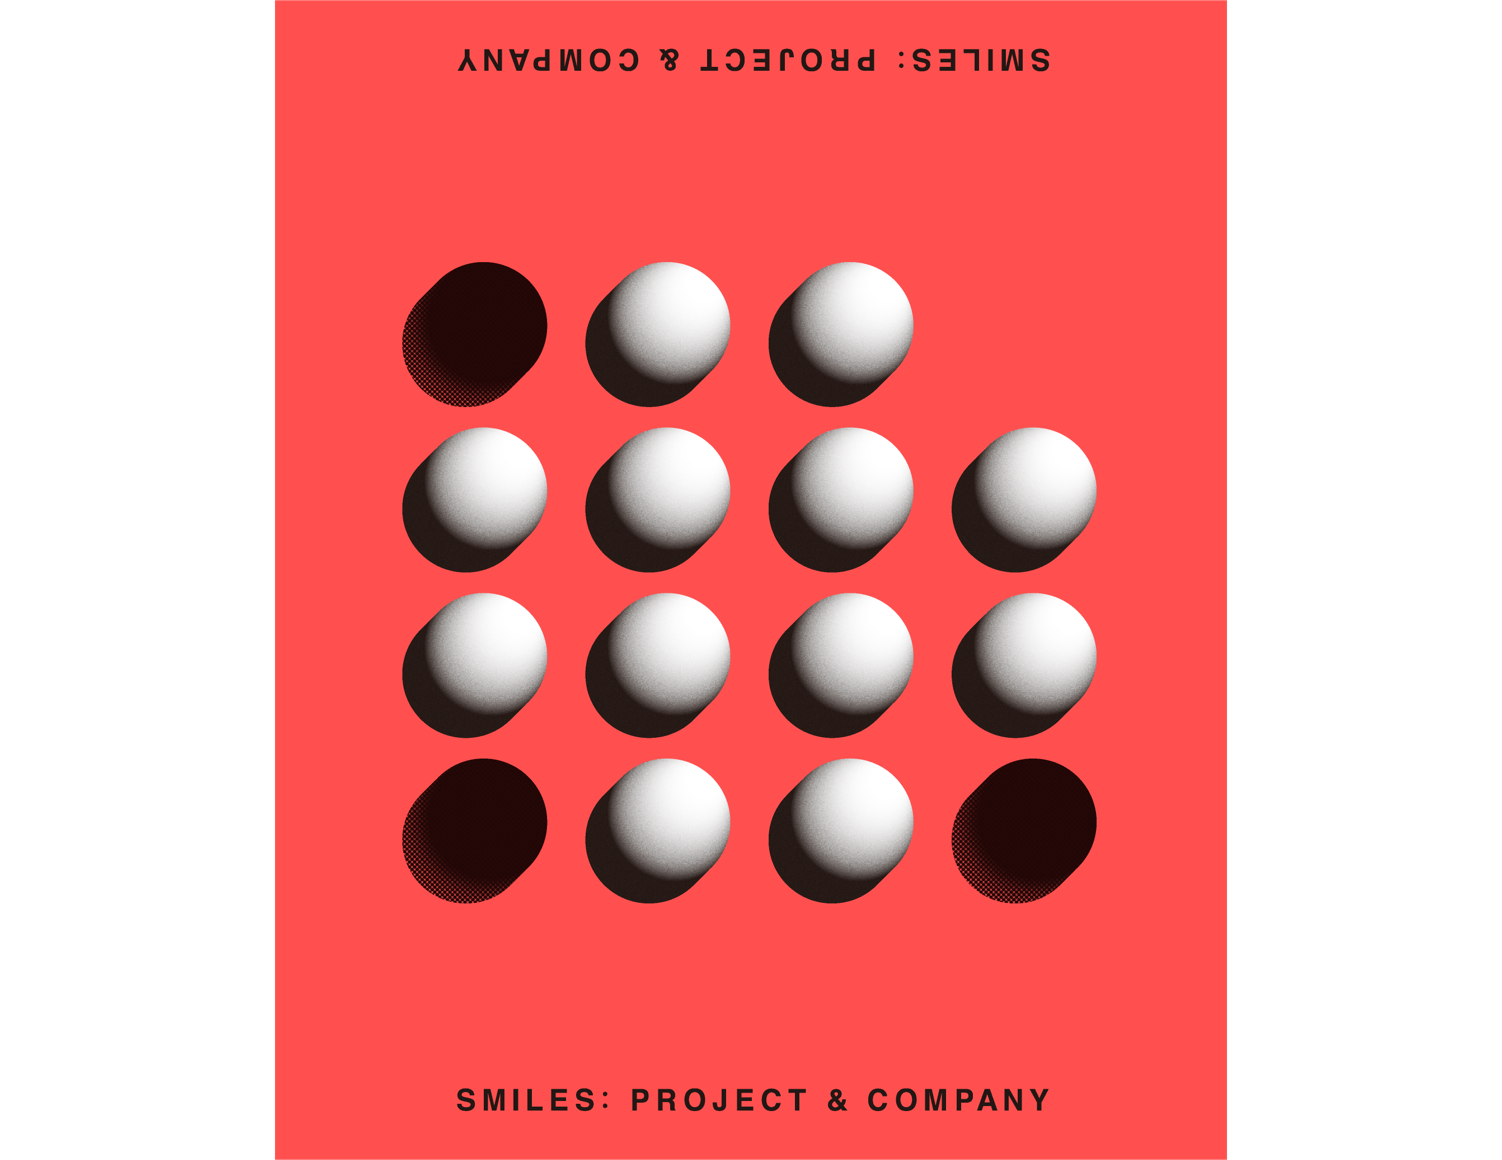 Smiles: PROJECT & COMPANY